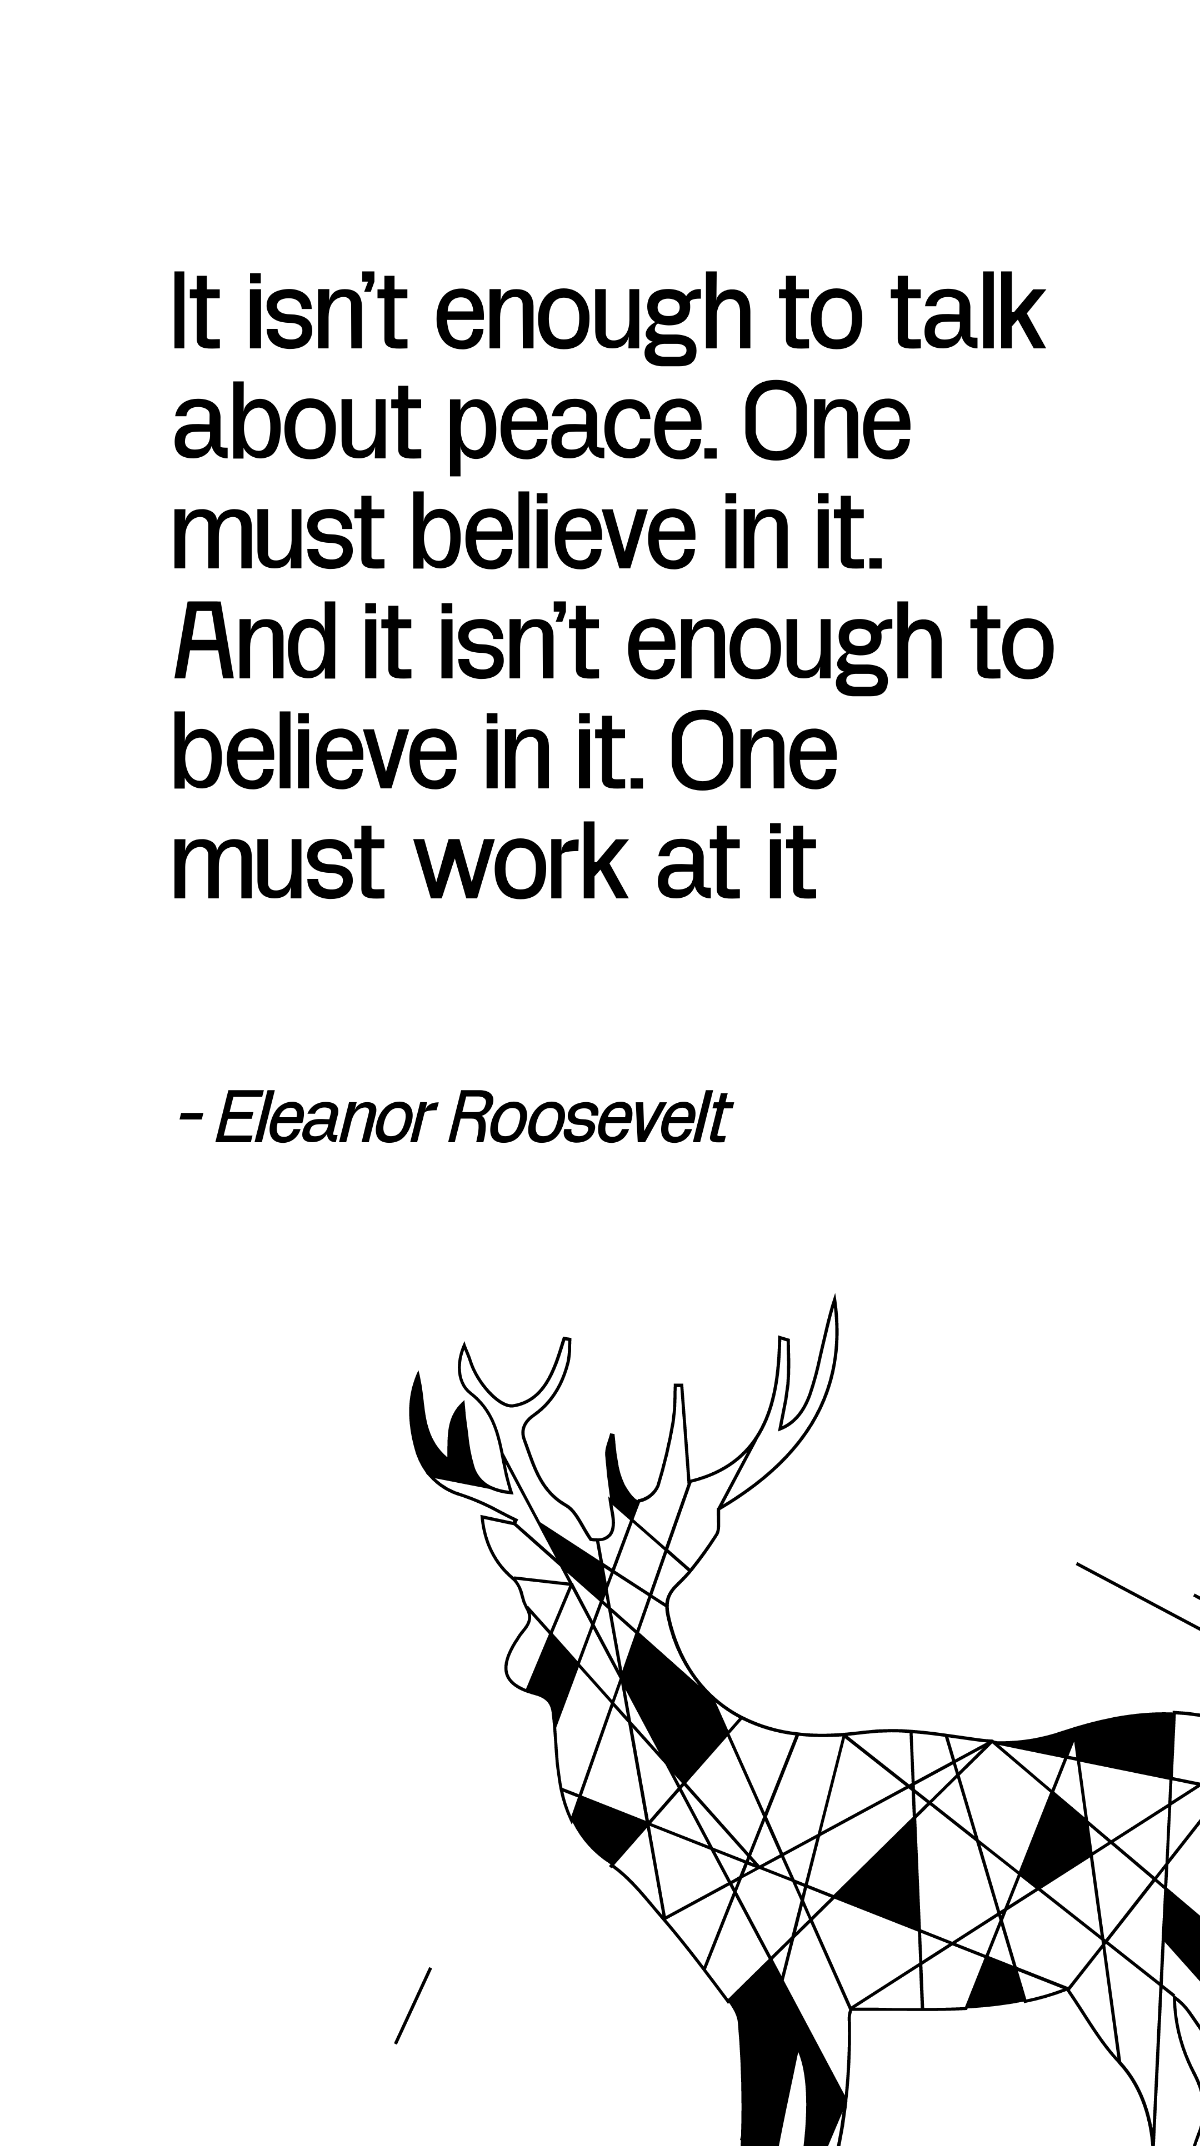 Eleanor Roosevelt - It isn't enough to talk about peace. One must believe in it. And it isn't enough to believe in it. One must work at it Template